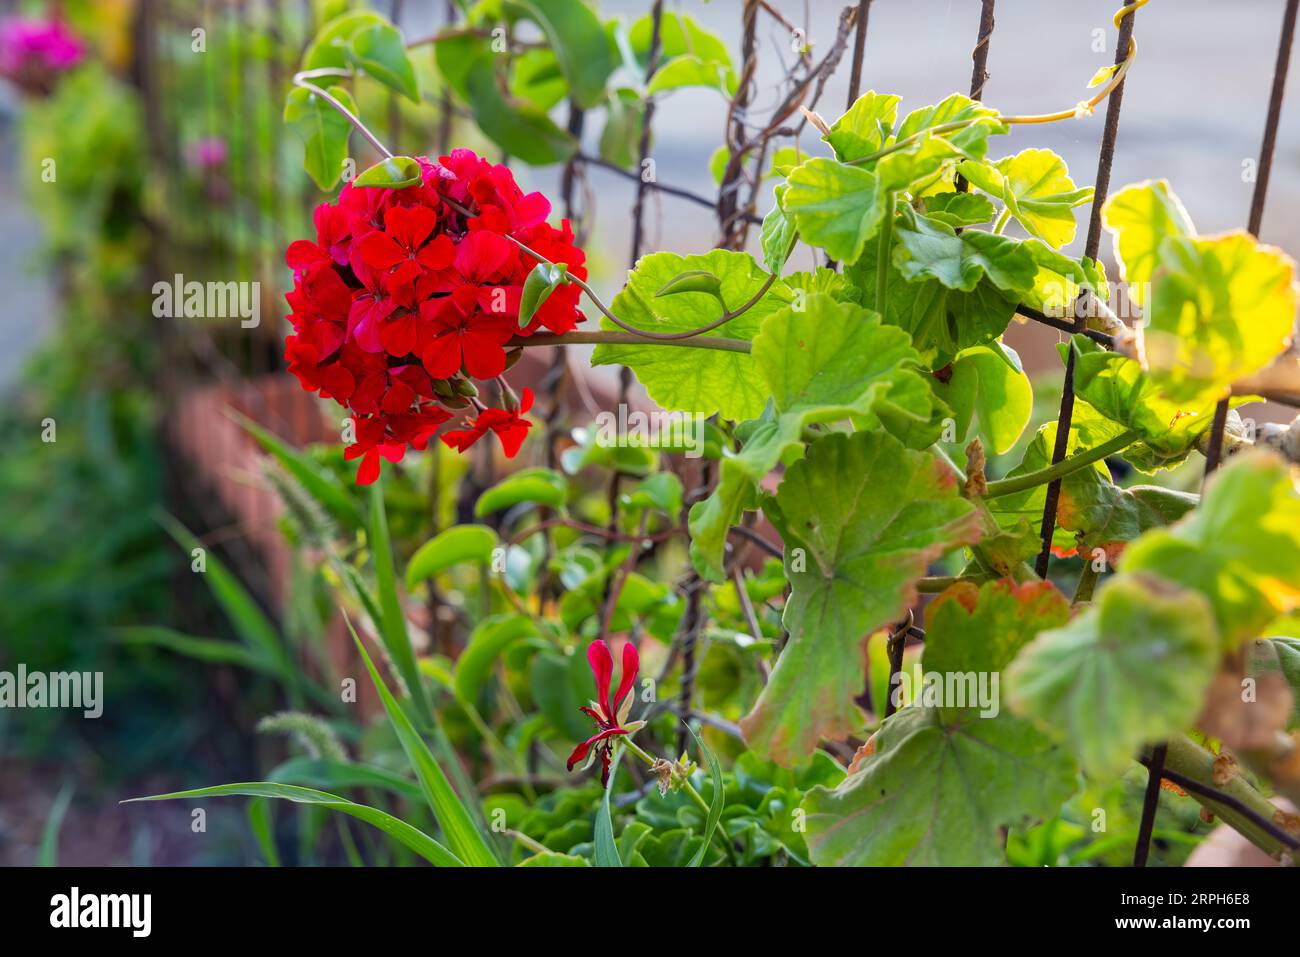 Witness the intriguing interplay of nature and industrial aesthetics as a vibrant zonal geranium flower graces a cold metal fence, a harmonious blend Stock Photo